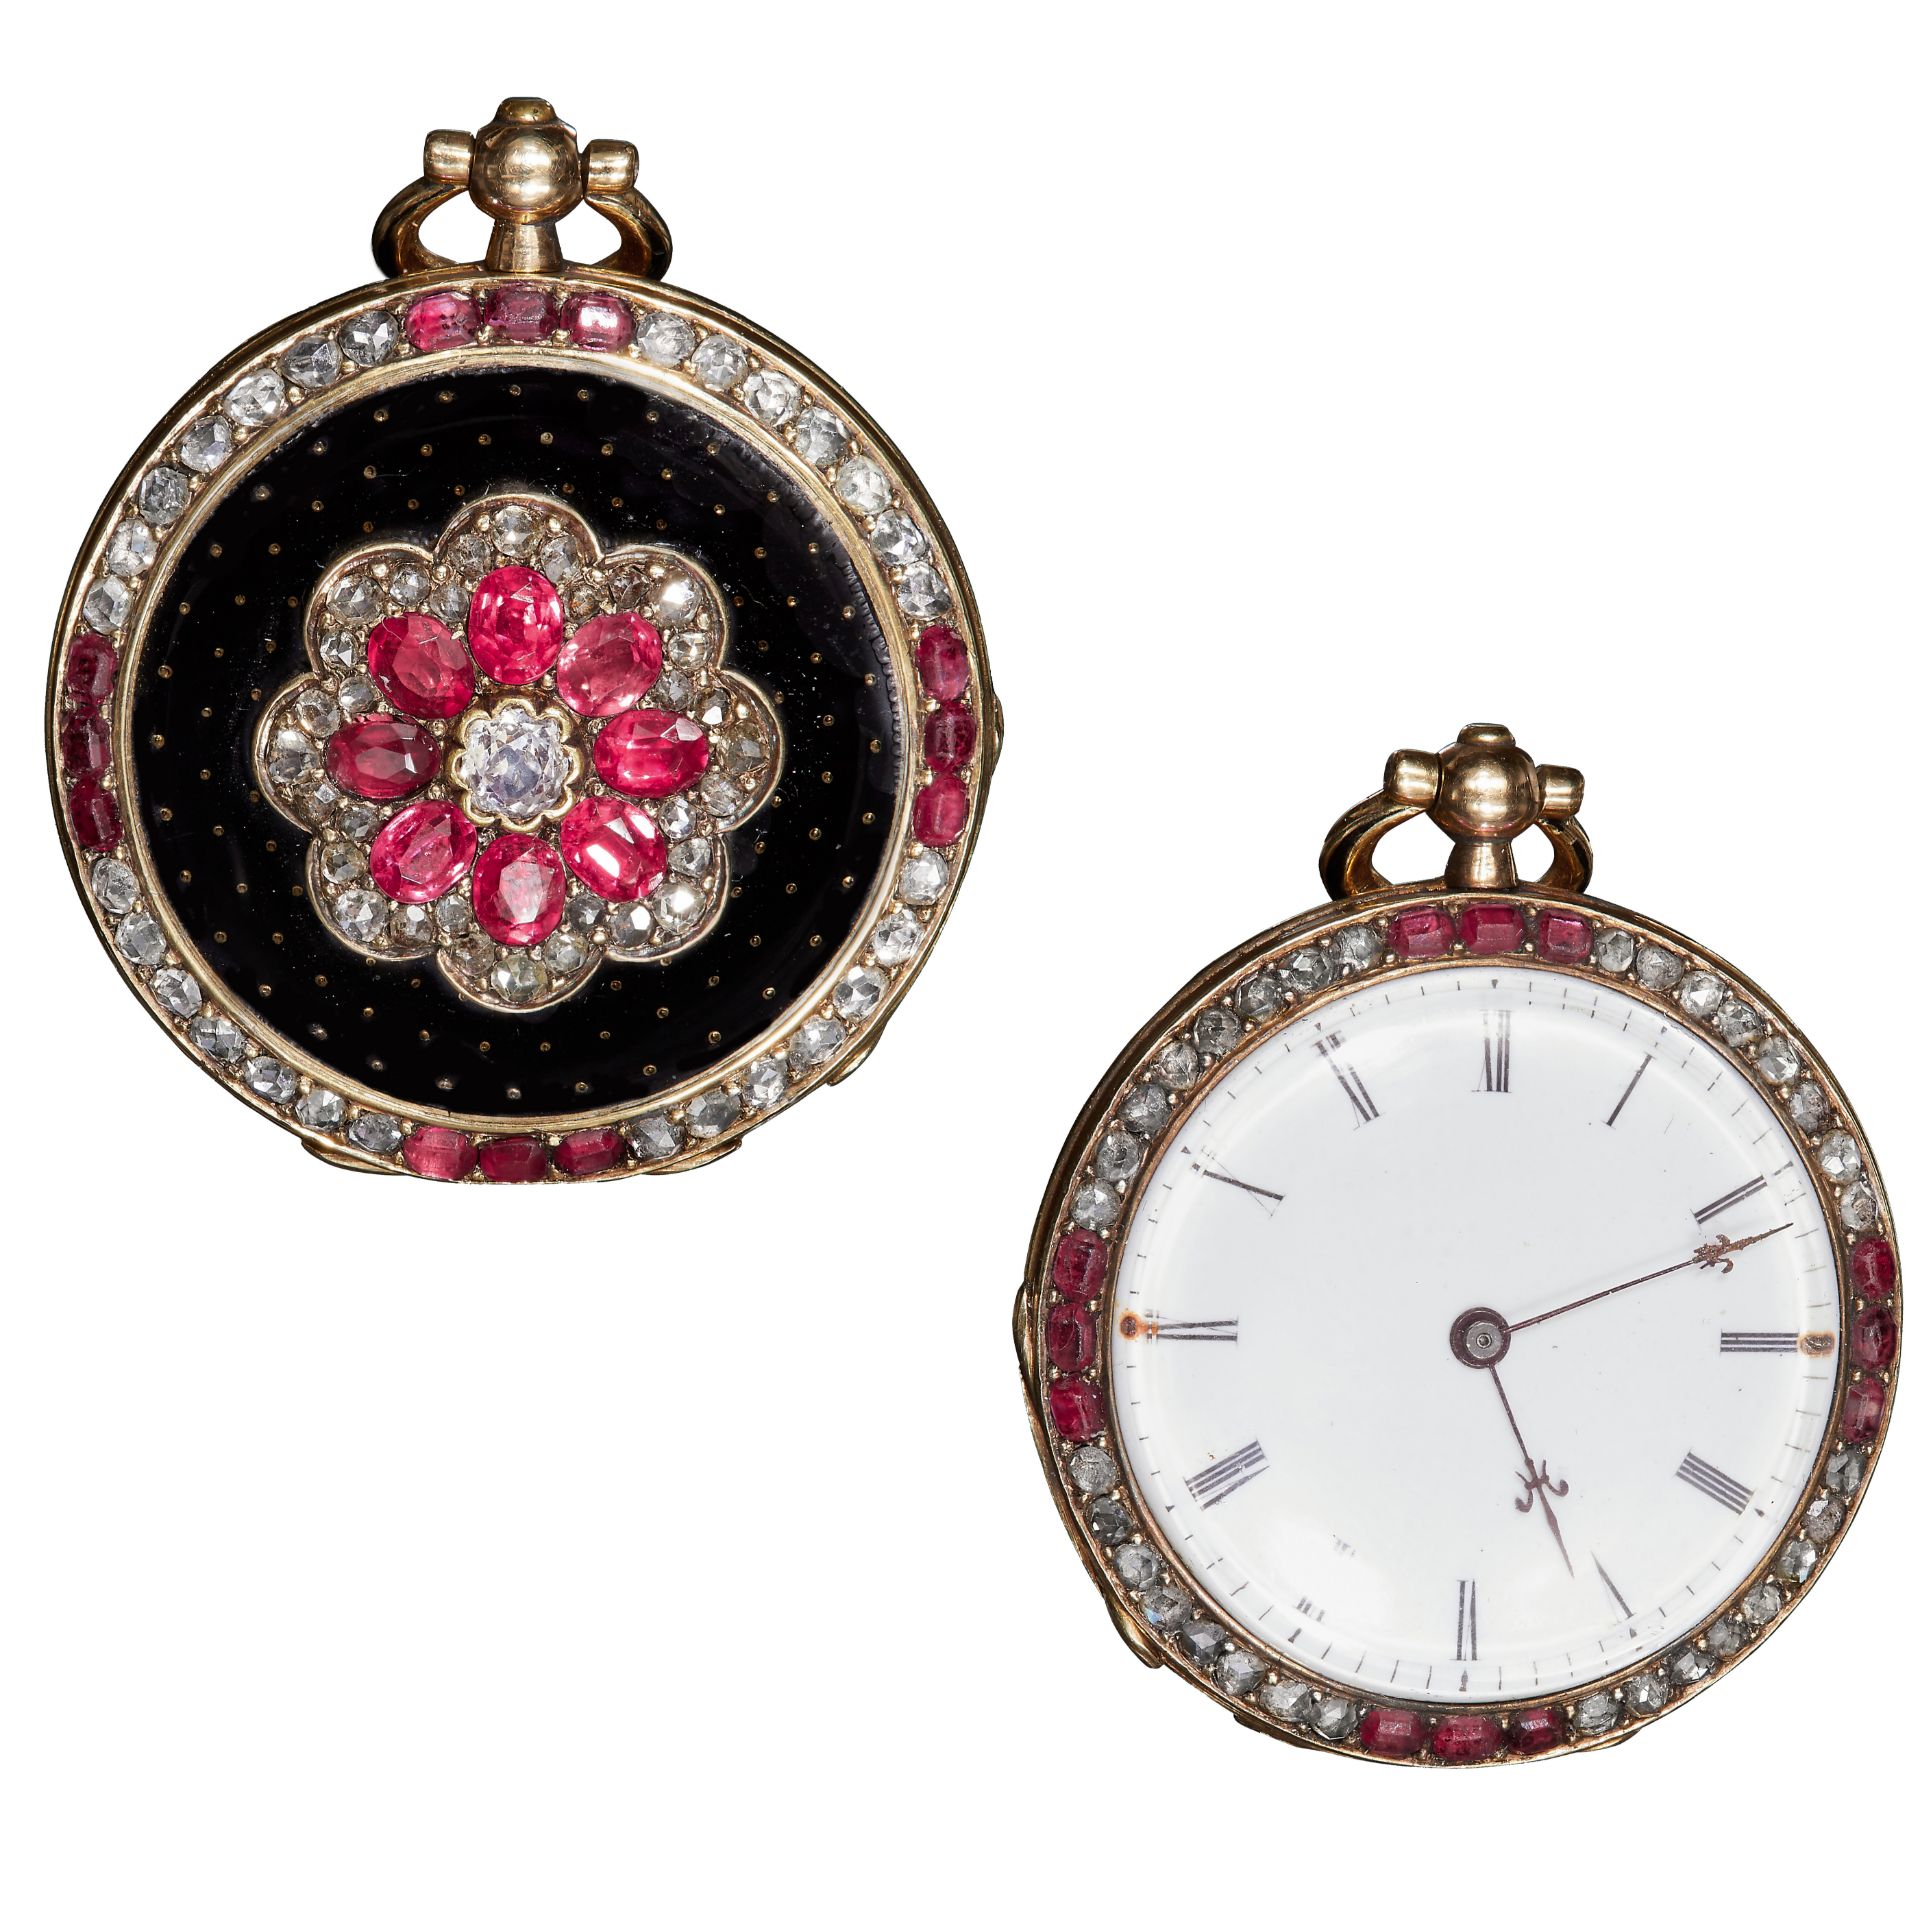 FINE EARLY 20TH CENTURY FRENCH DIAMOND AND RUBY FOB WATCH BY ROSSEL & FILS